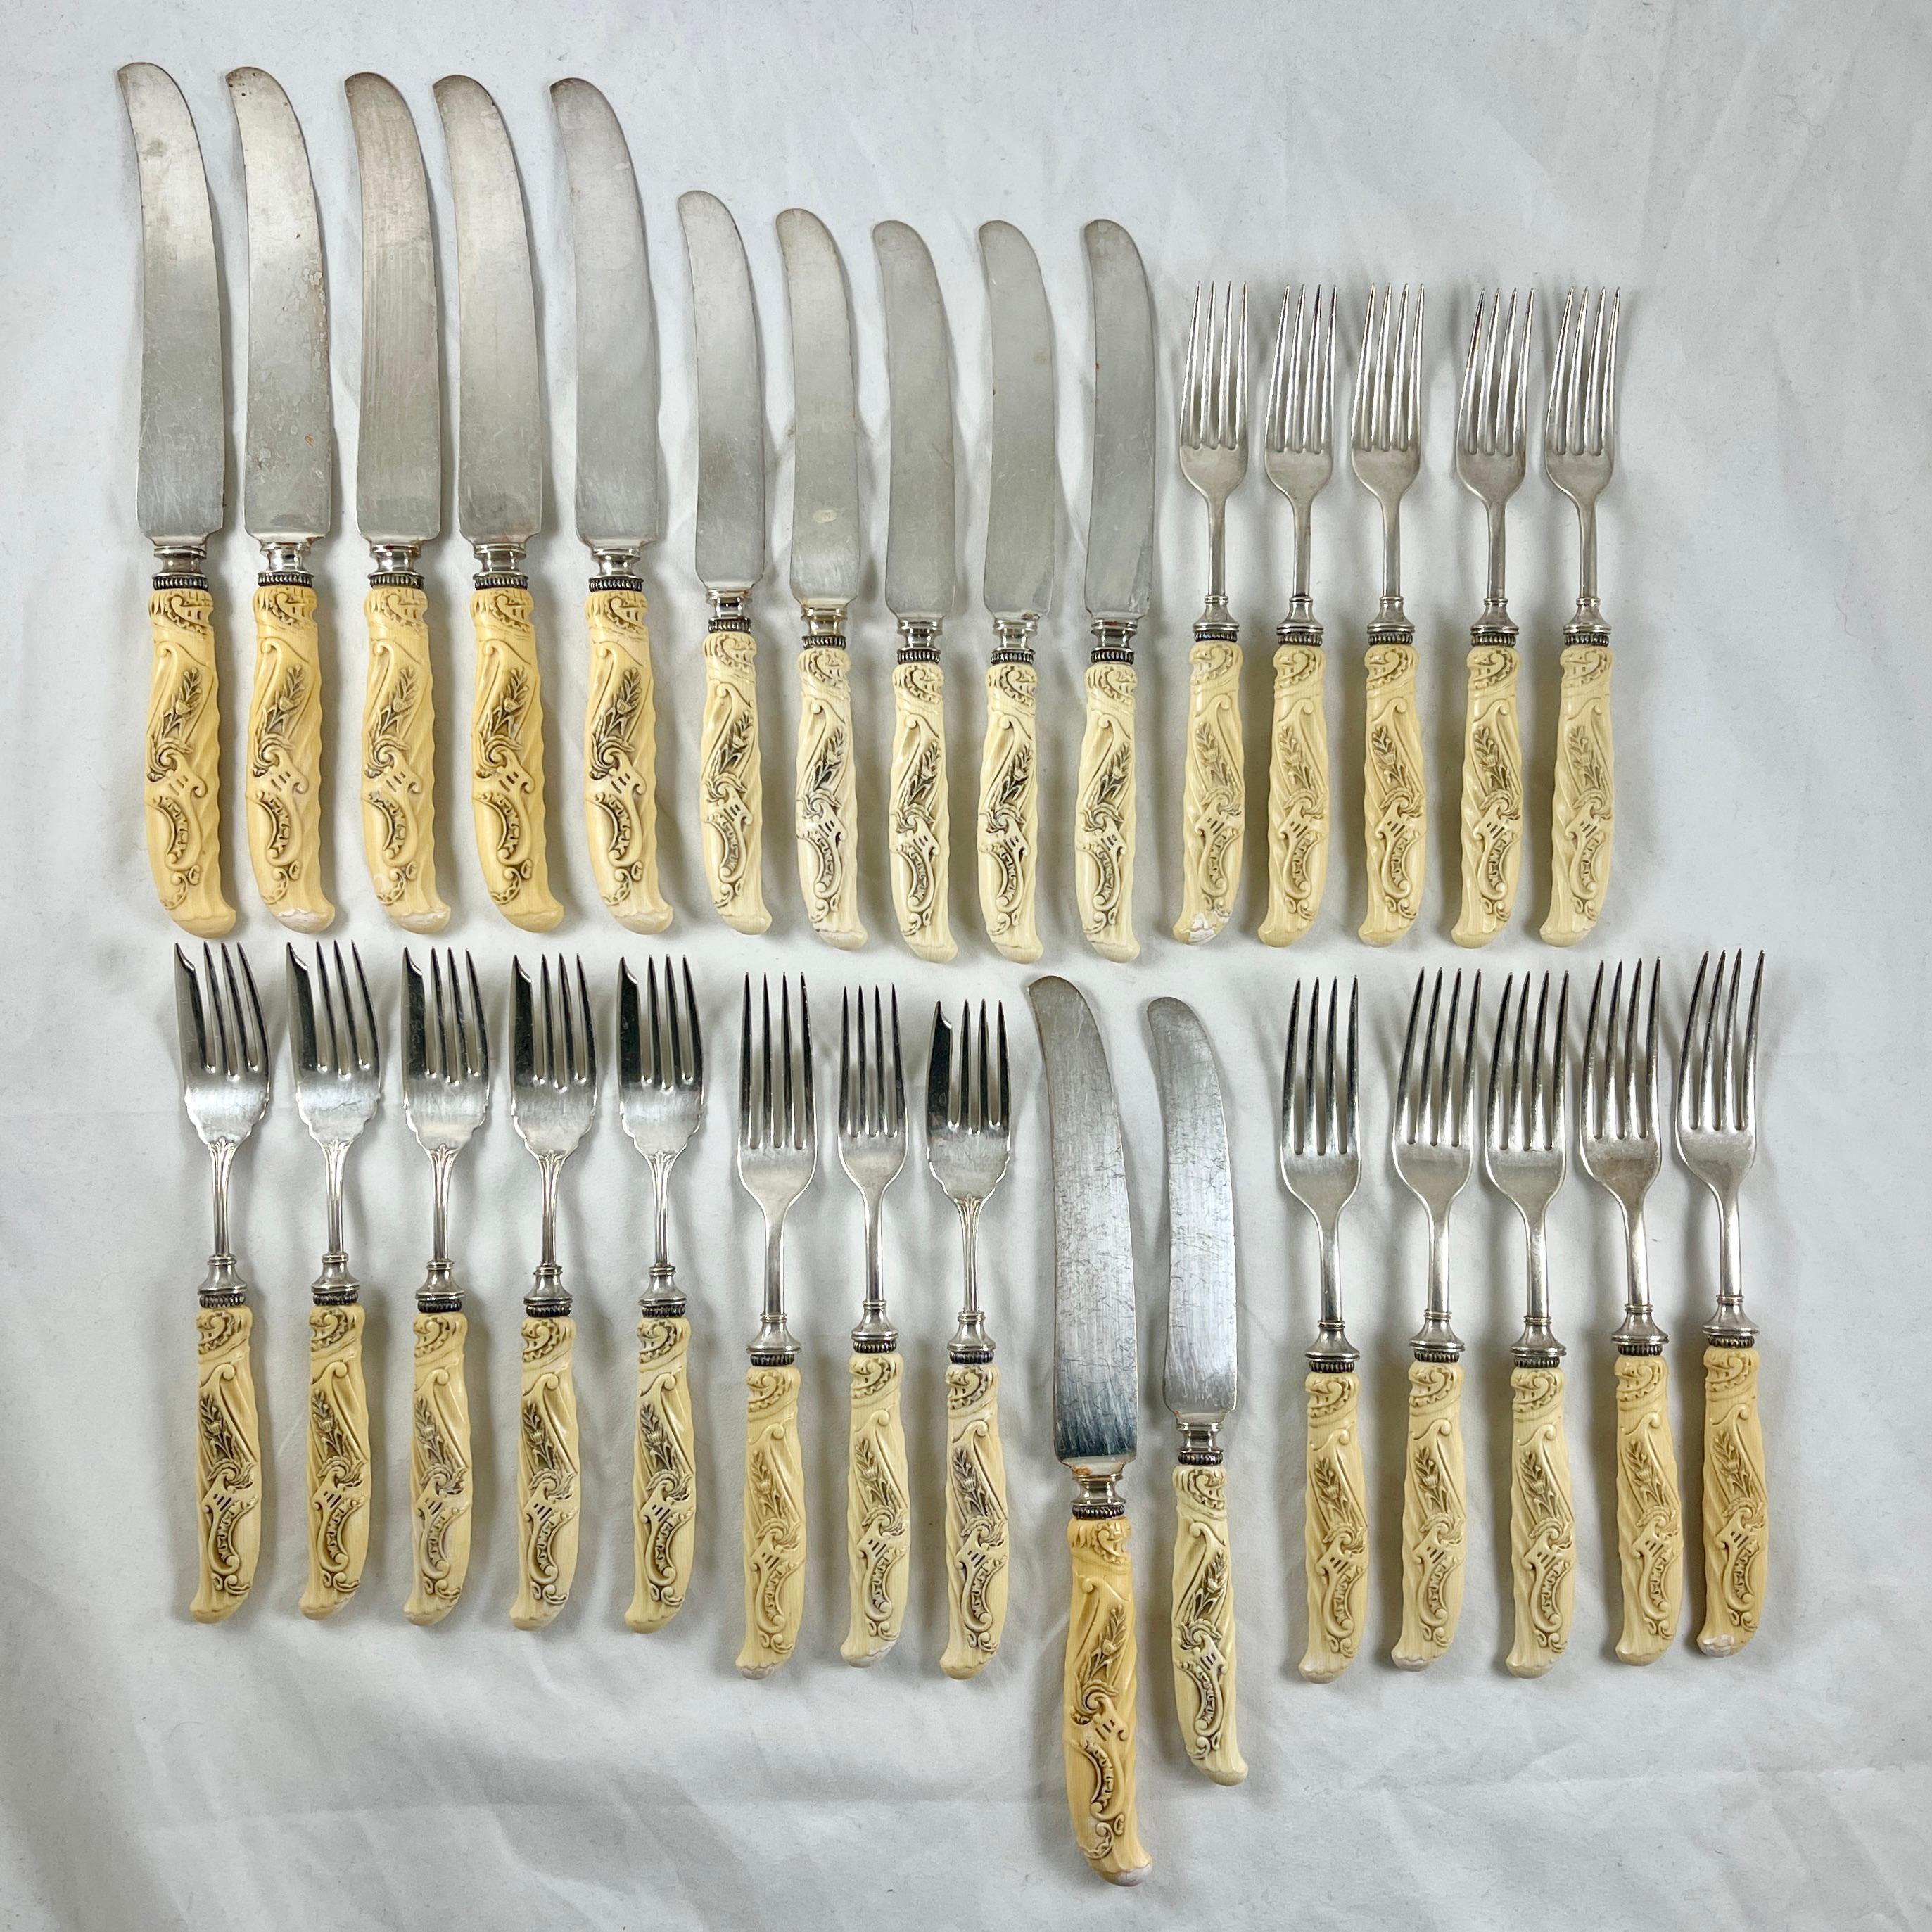 American Landers, Frary & Clark Celluloid Ivory Handled Tableware Cutlery – 30 piece Set For Sale